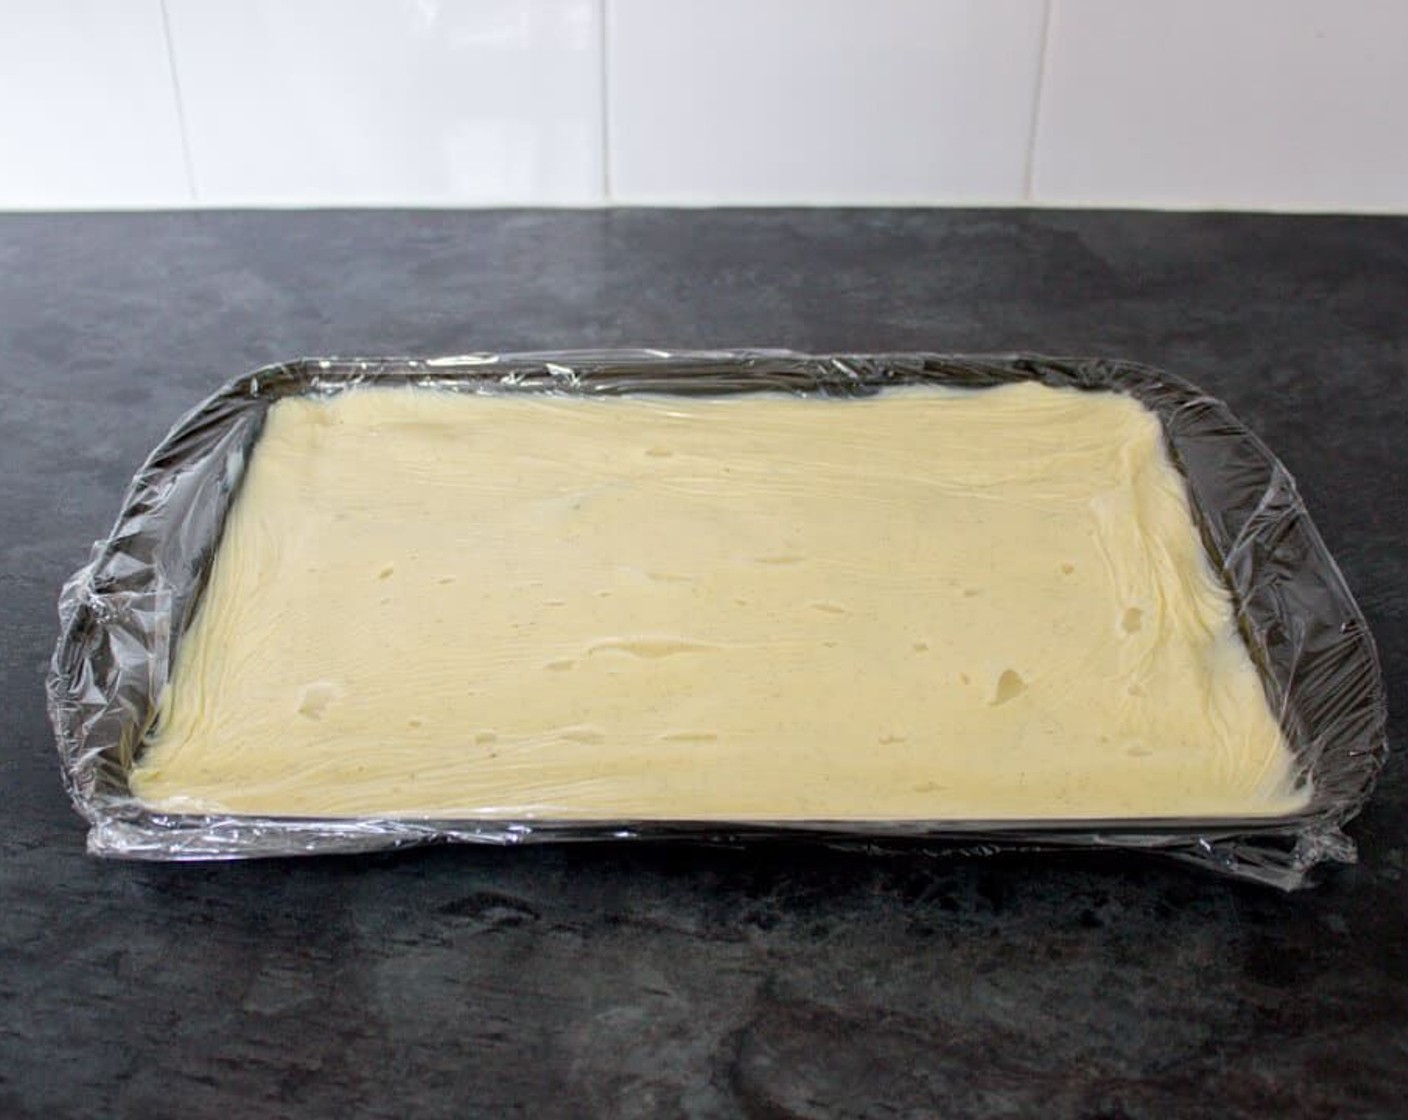 step 20 Spread it over a baking sheet and cover with cling film, making sure the film actually touches the surface of the creme patissiere. This will stop a skin from forming. Place in the fridge until needed.